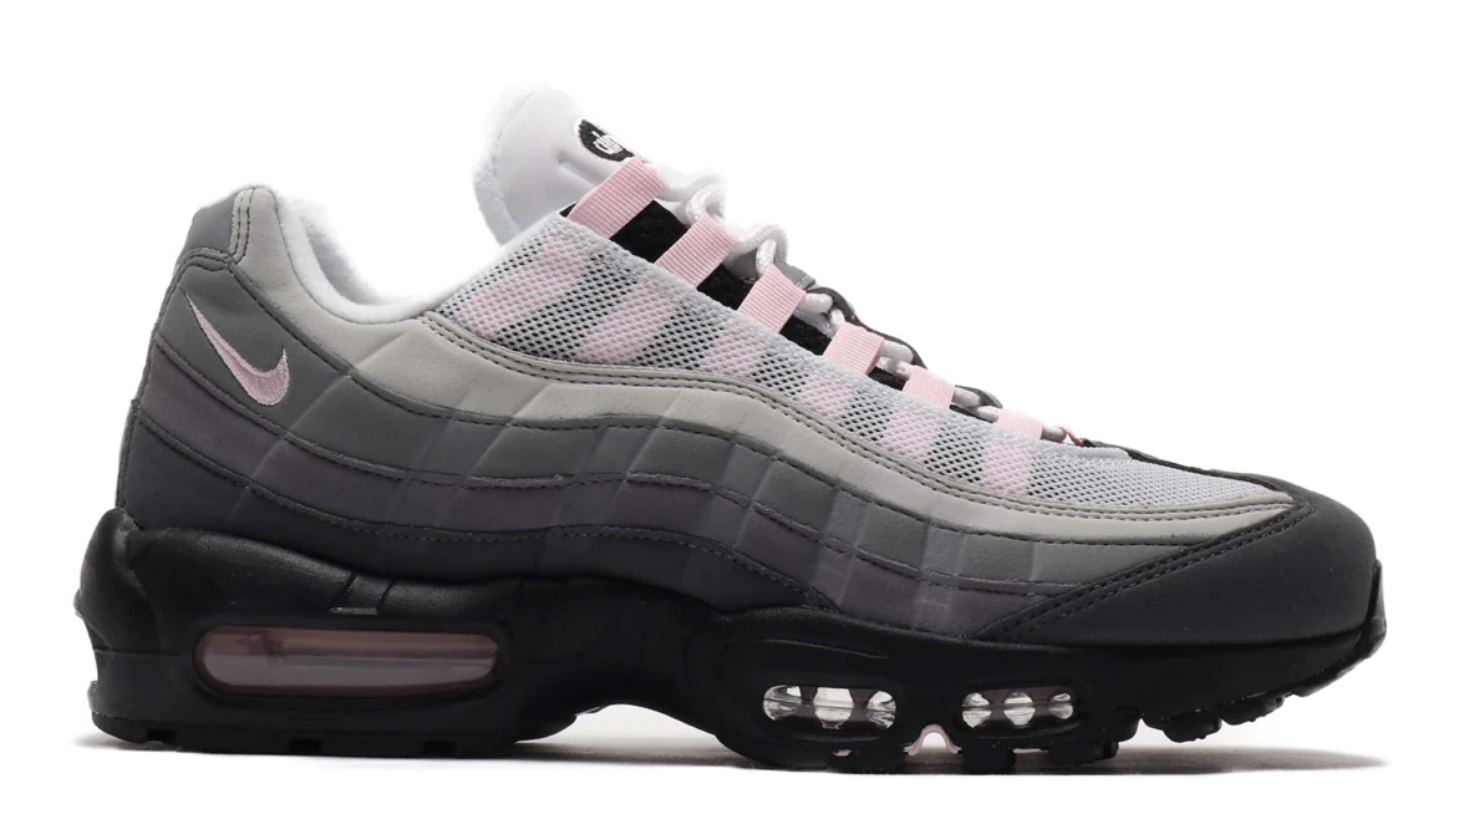 white and pink air max 95